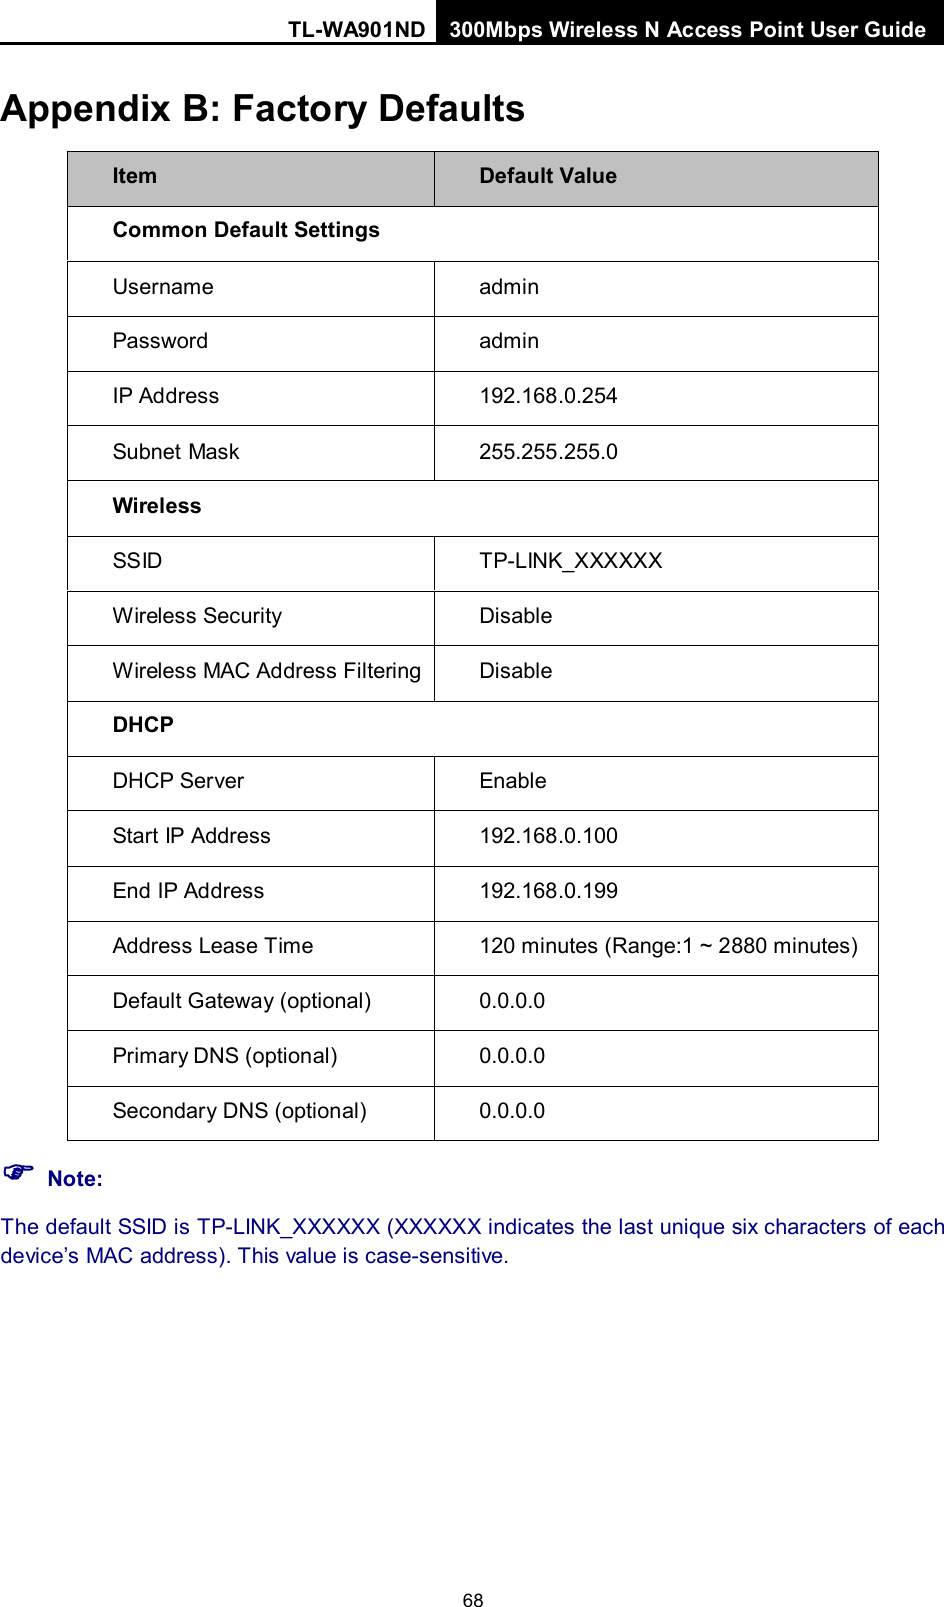 TL-WA901ND 300Mbps Wireless N Access Point User Guide  68 Appendix B: Factory Defaults Item Default Value Common Default Settings Username   admin Password admin IP Address 192.168.0.254 Subnet Mask    255.255.255.0 Wireless SSID TP-LINK_XXXXXX Wireless Security Disable Wireless MAC Address Filtering  Disable DHCP DHCP Server Enable Start IP Address 192.168.0.100 End IP Address 192.168.0.199 Address Lease Time 120 minutes (Range:1 ~ 2880 minutes) Default Gateway (optional)    0.0.0.0 Primary DNS (optional) 0.0.0.0 Secondary DNS (optional)   0.0.0.0  Note: The default SSID is TP-LINK_XXXXXX (XXXXXX indicates the last unique six characters of each device’s MAC address). This value is case-sensitive. 